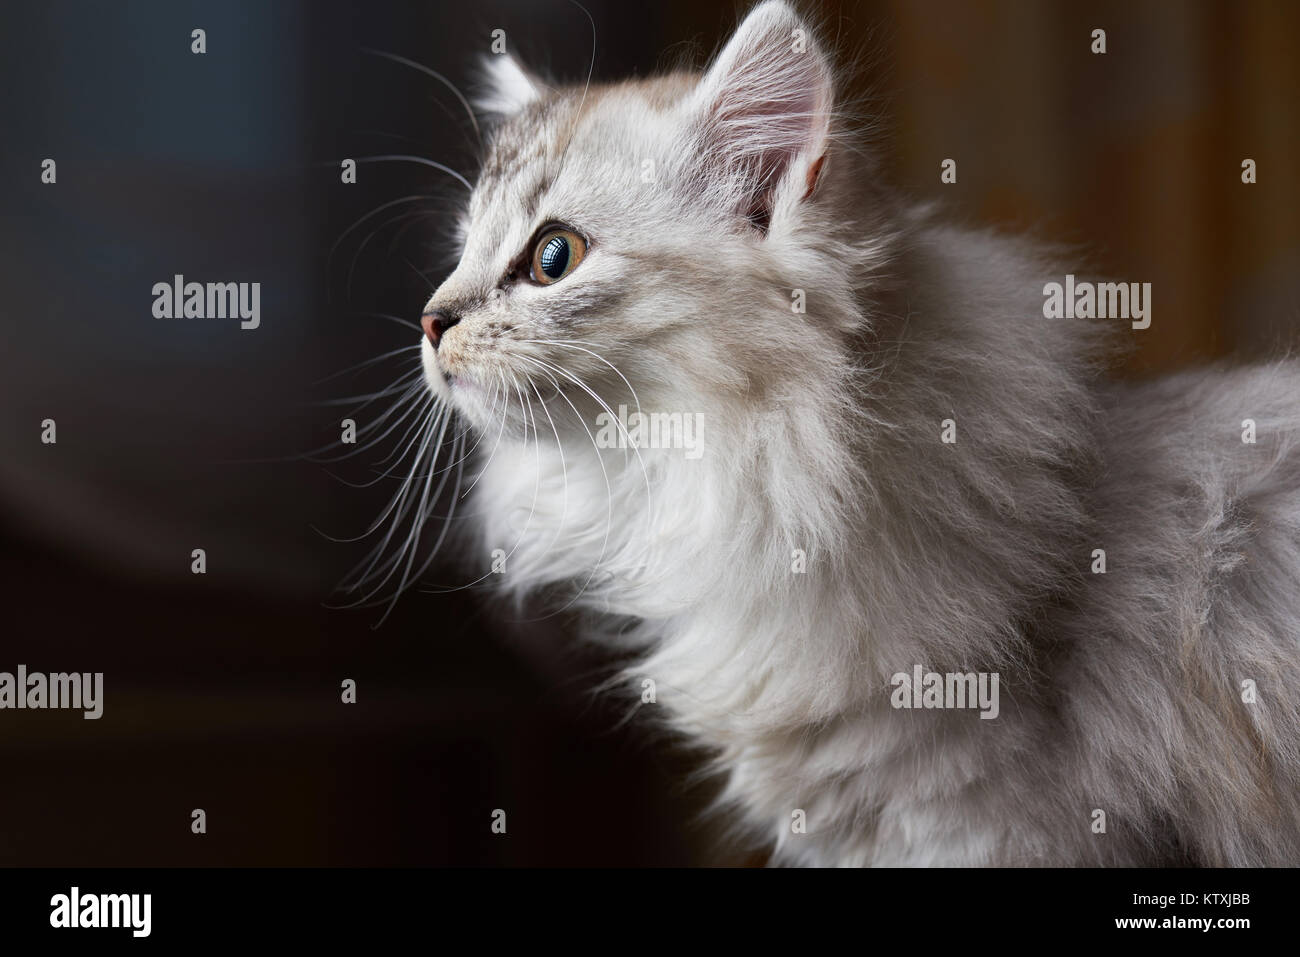 Curious cat looking on side. Profile of gray kitty Stock Photo